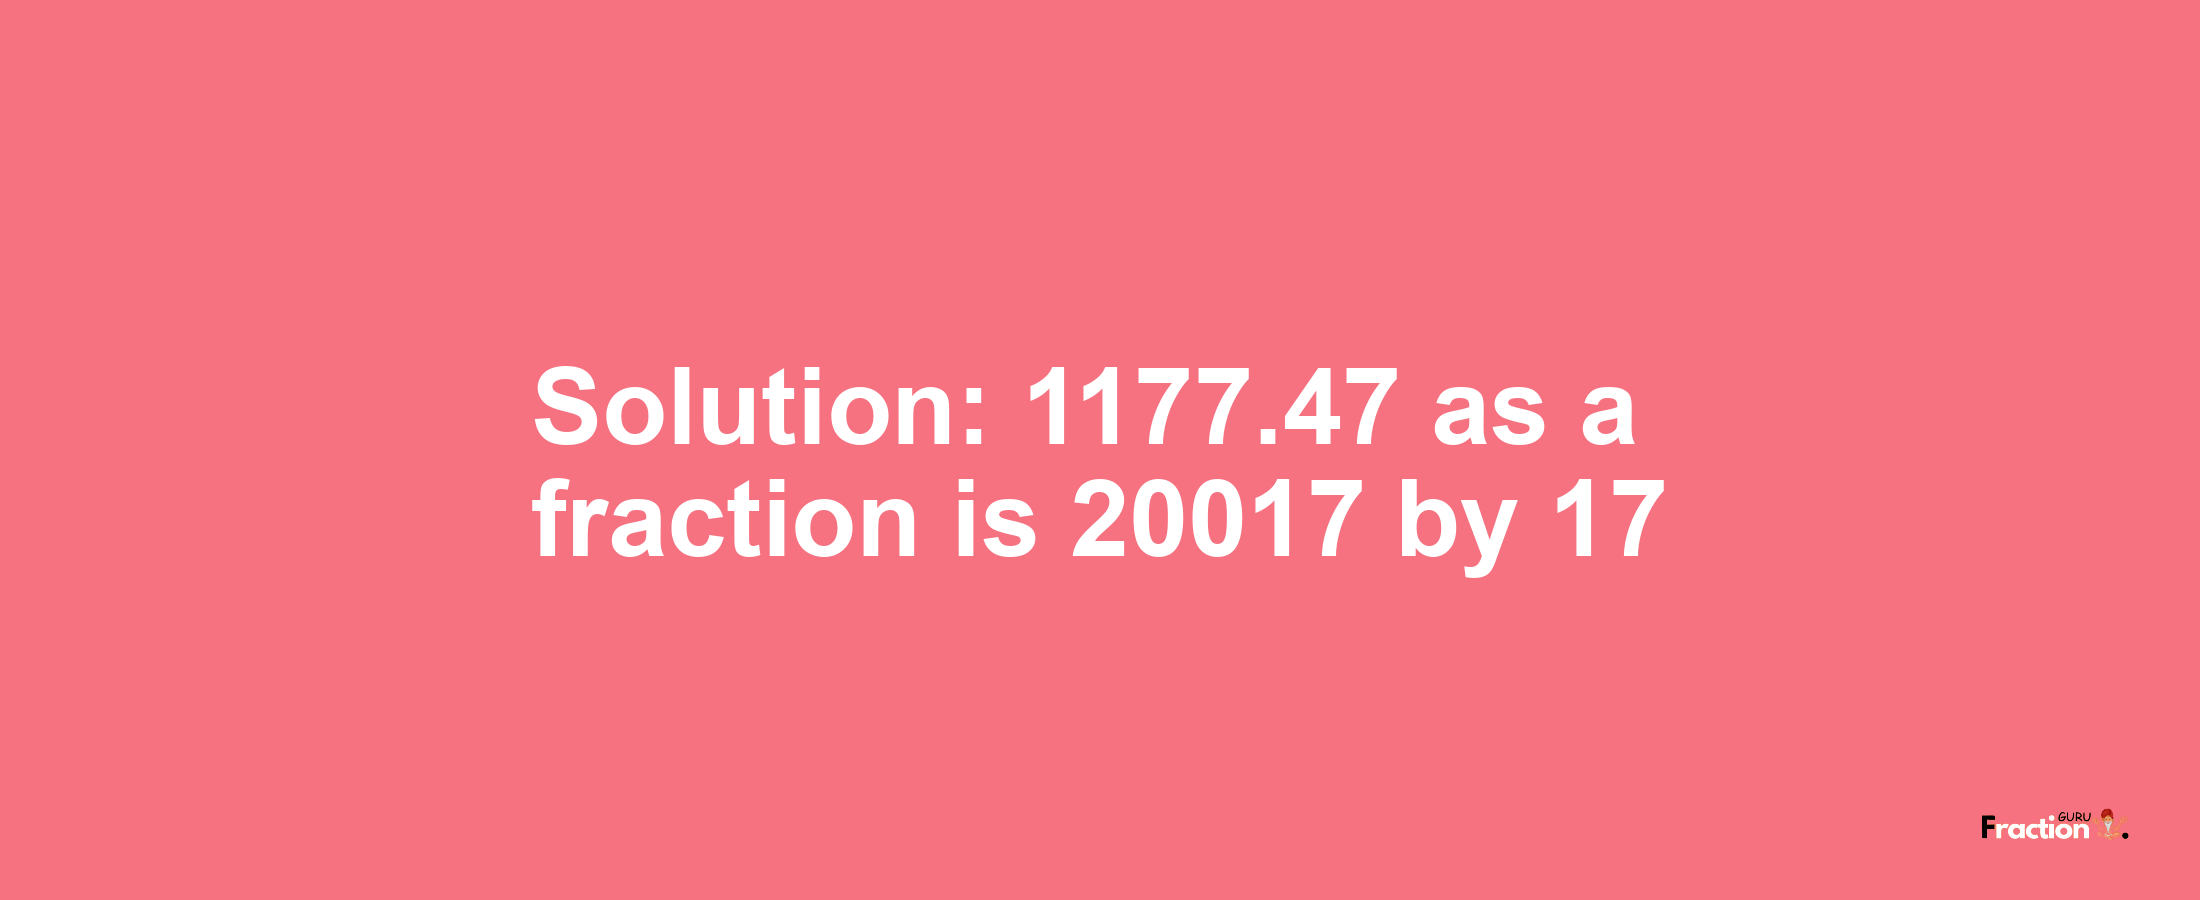 Solution:1177.47 as a fraction is 20017/17